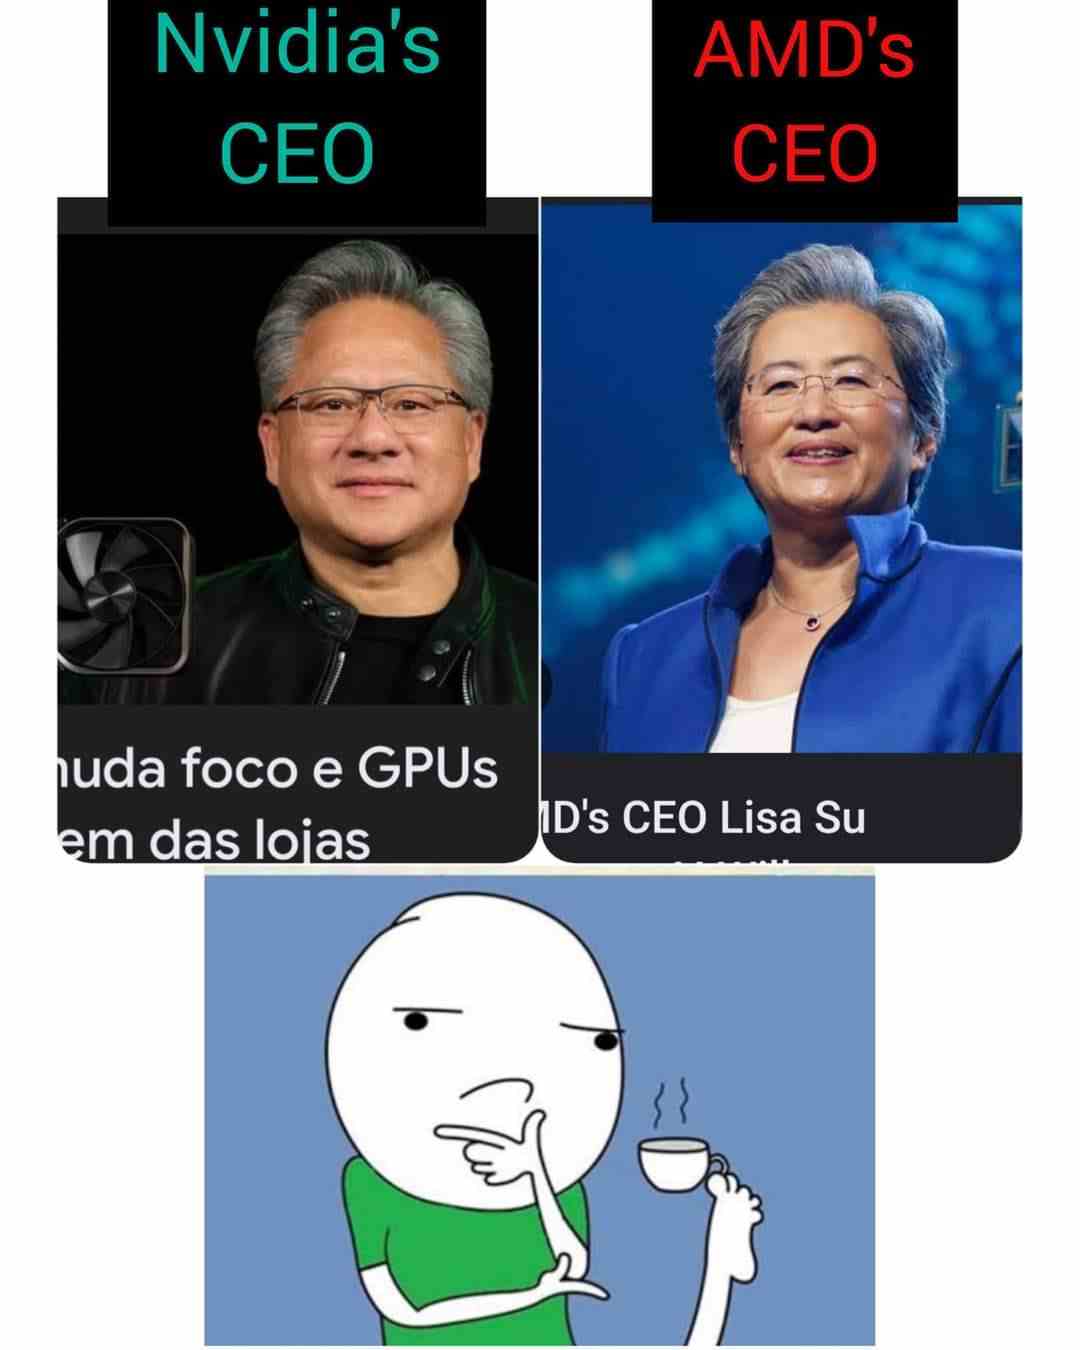 NVIDIA CEO , I want to be identified as AMD CEO